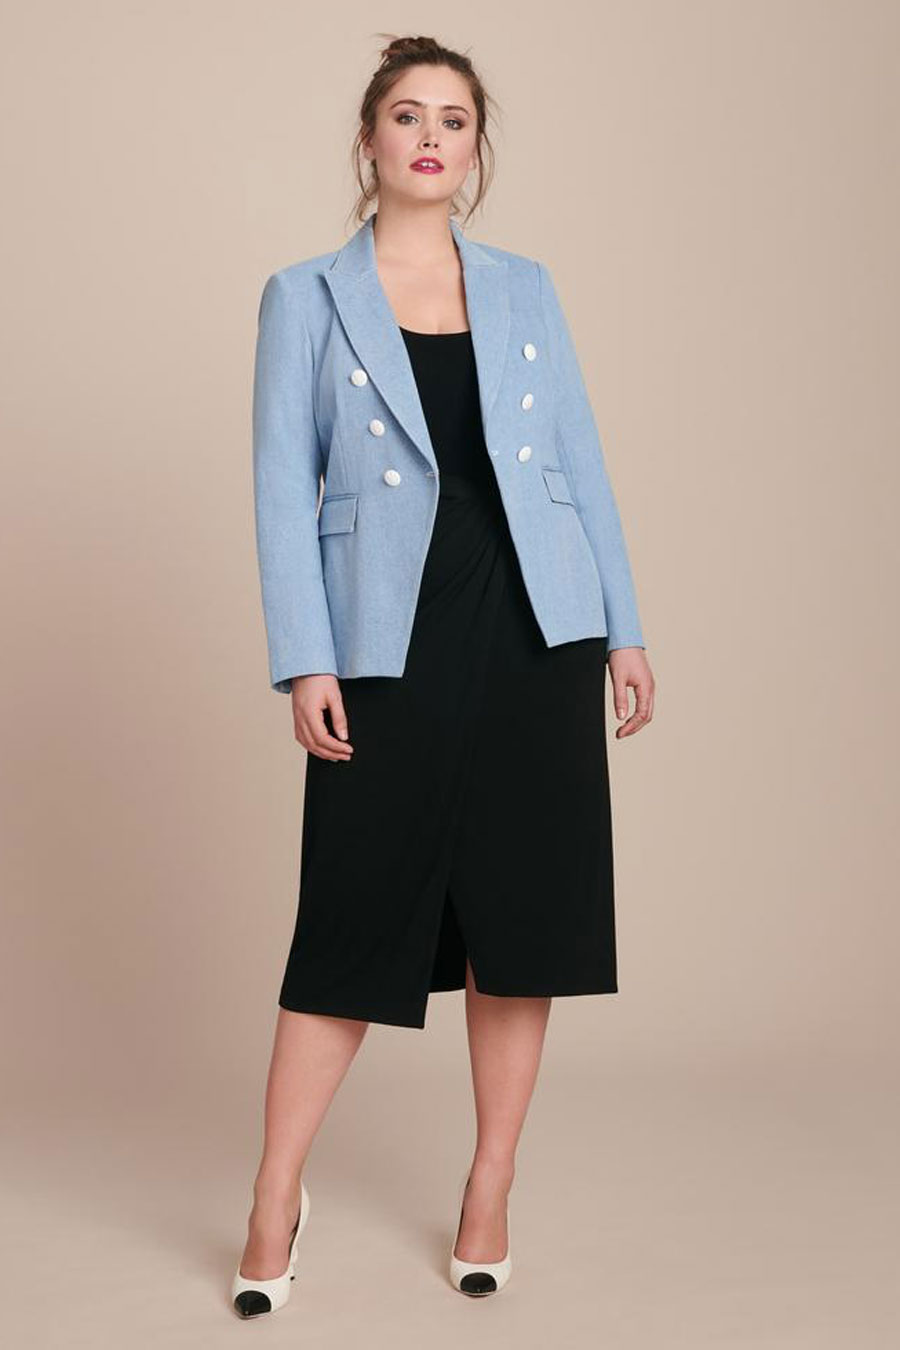 Black And Light Blue Outfits Flash Sales, GET 57% OFF, 